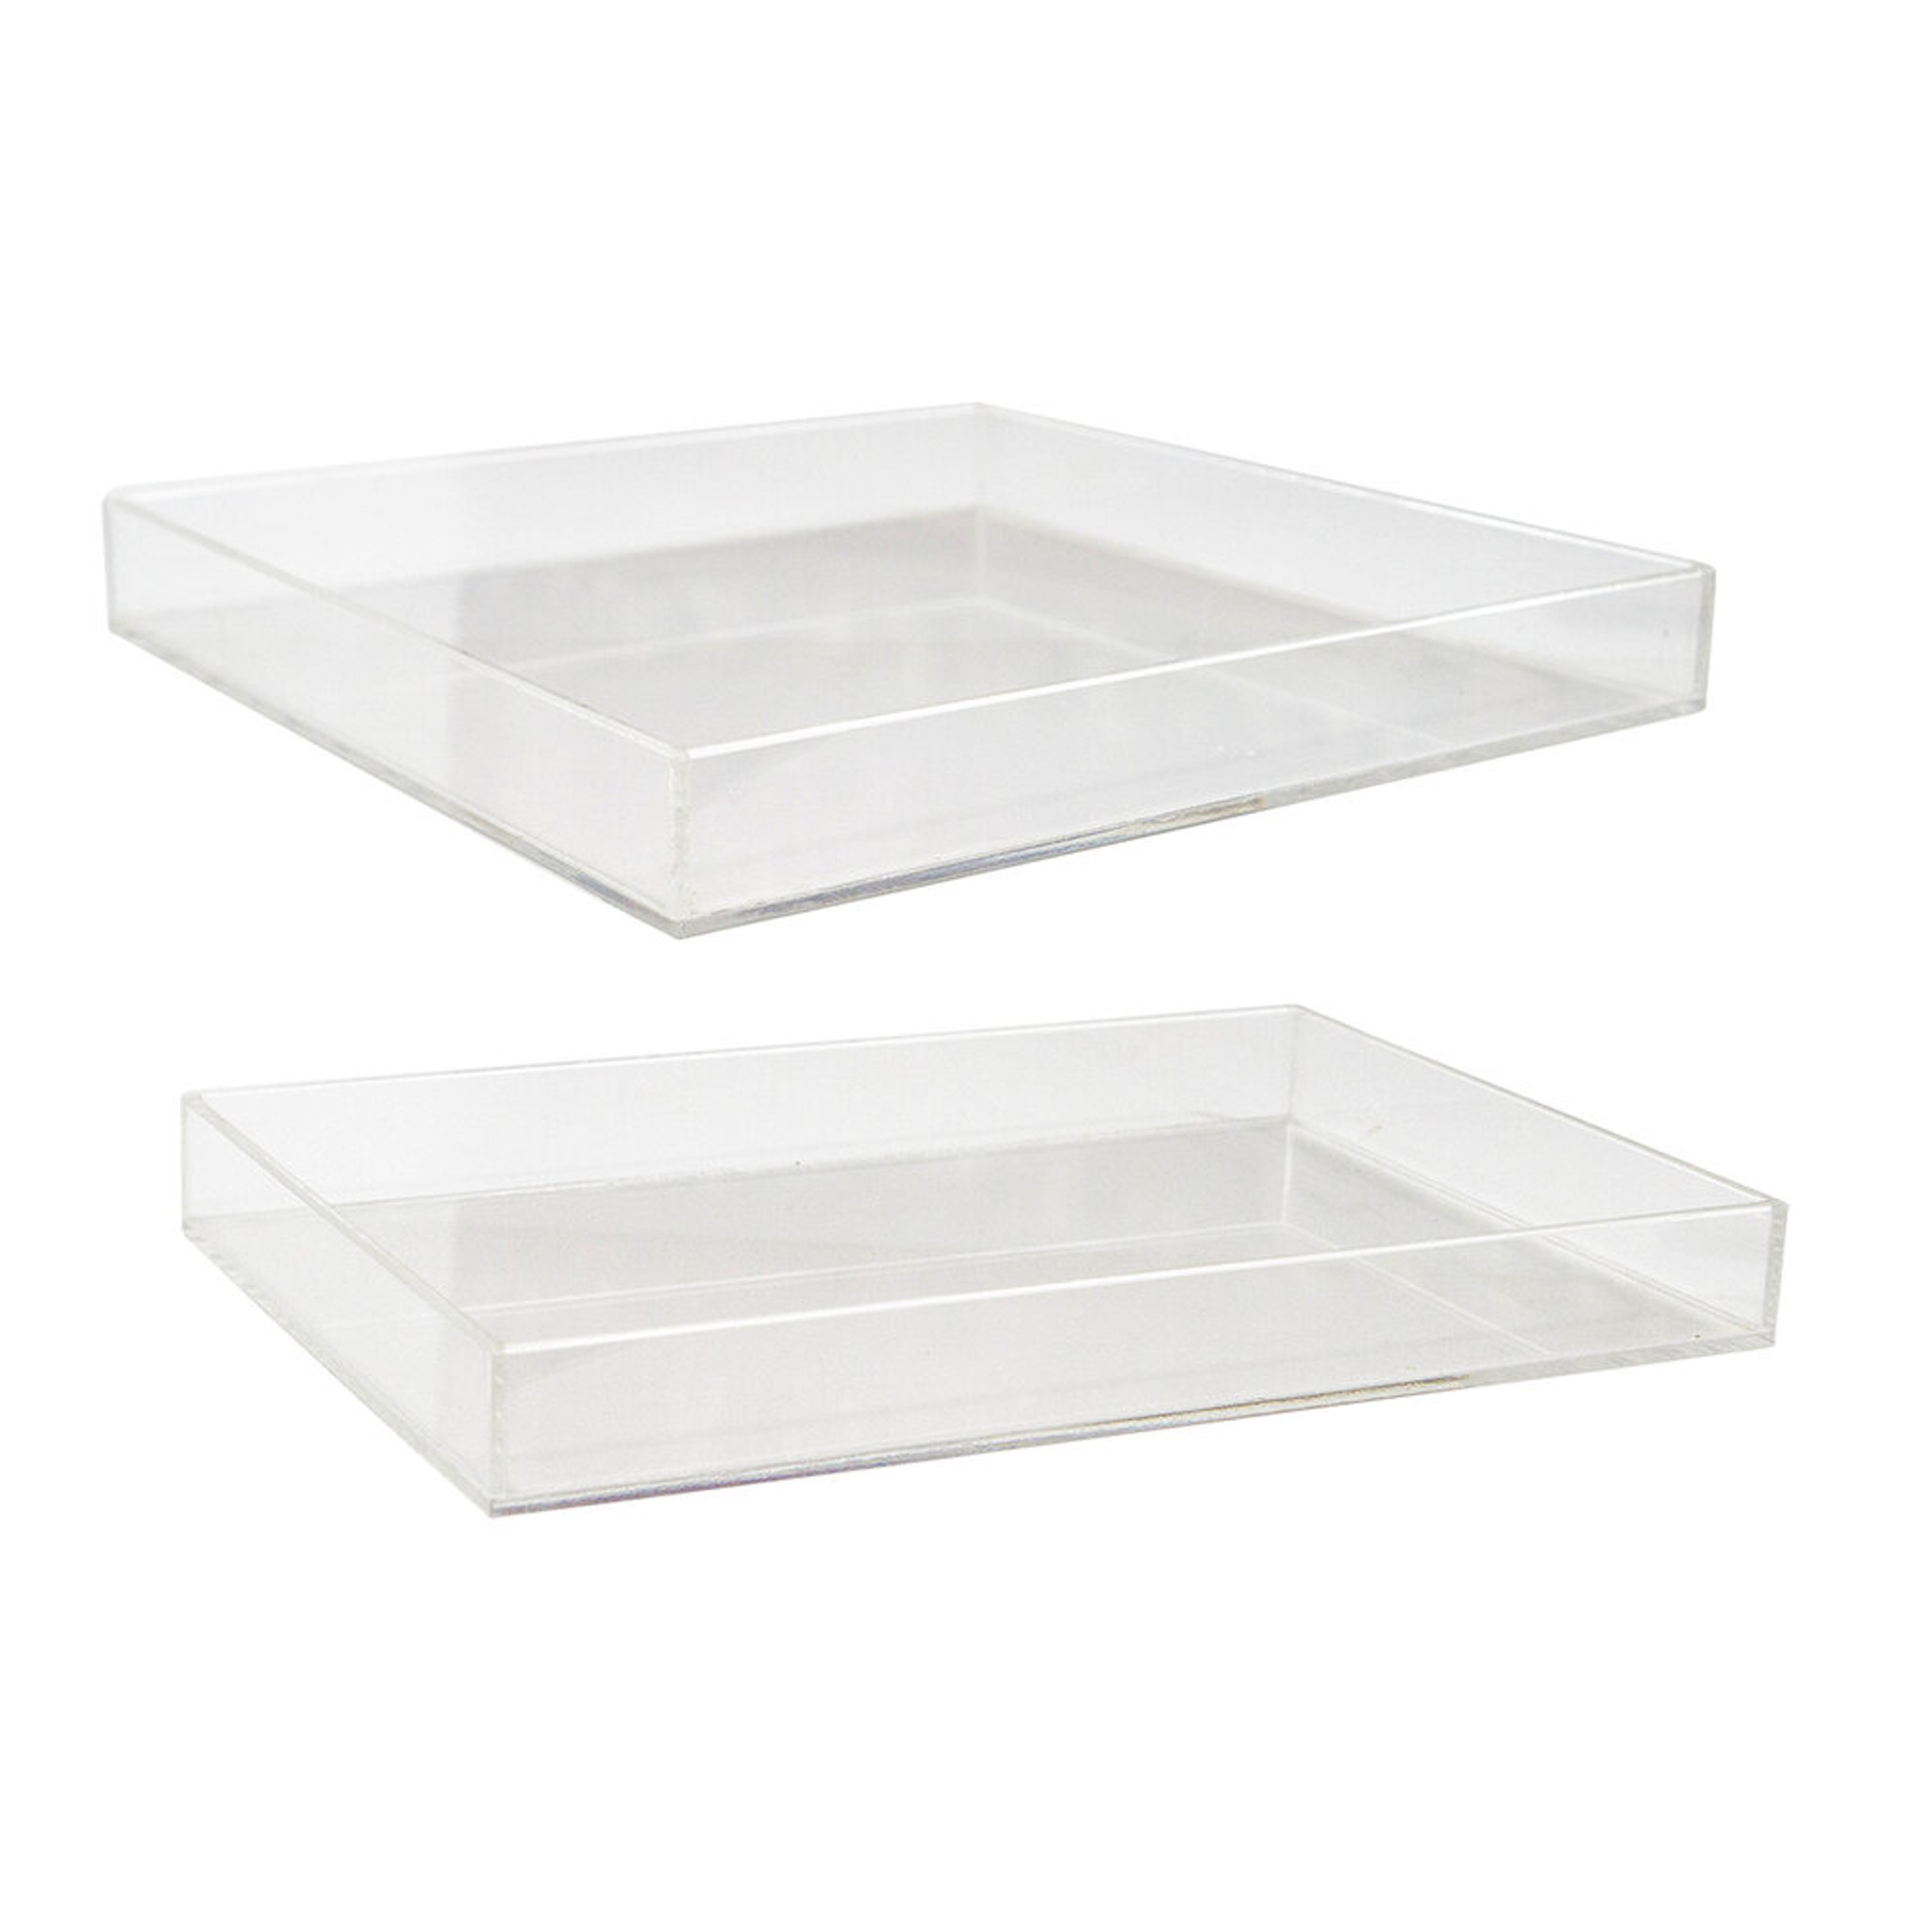 Large Simple Lucite Ottoman Tray